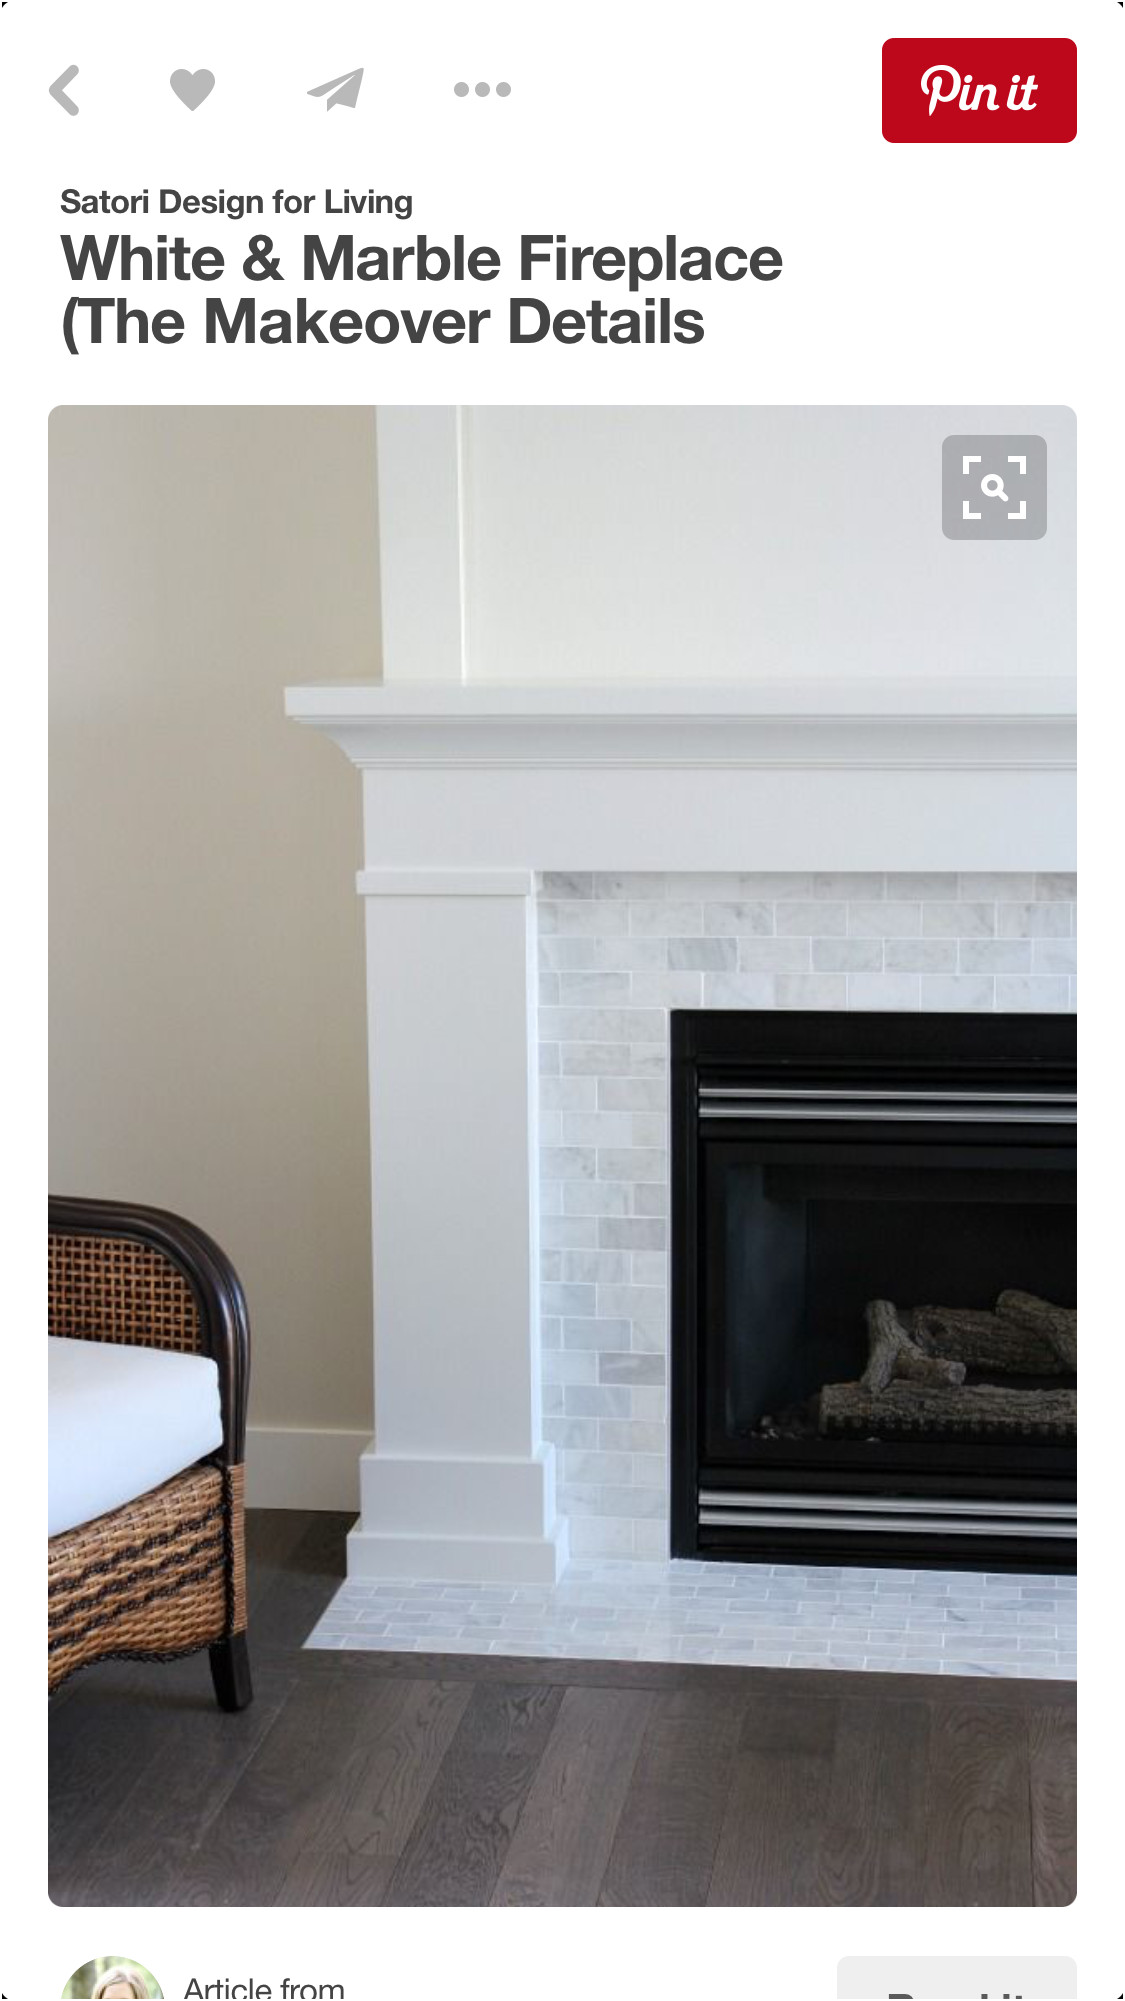 New Fireplace Tiling Ideas